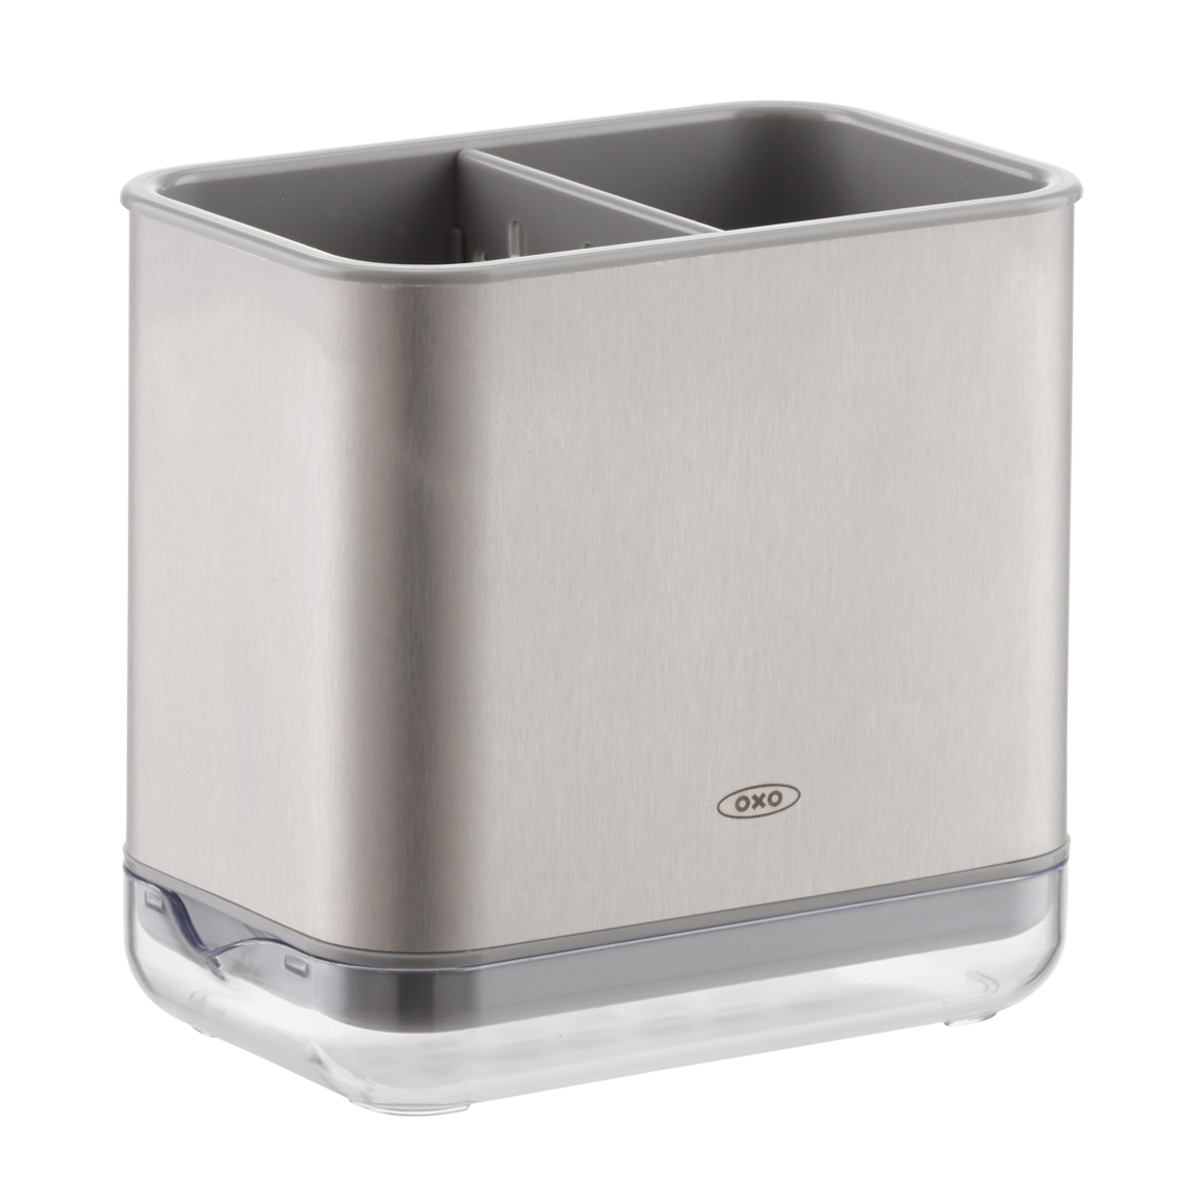 OXO Good Grips Stainless Steel Sink Caddy, Gray